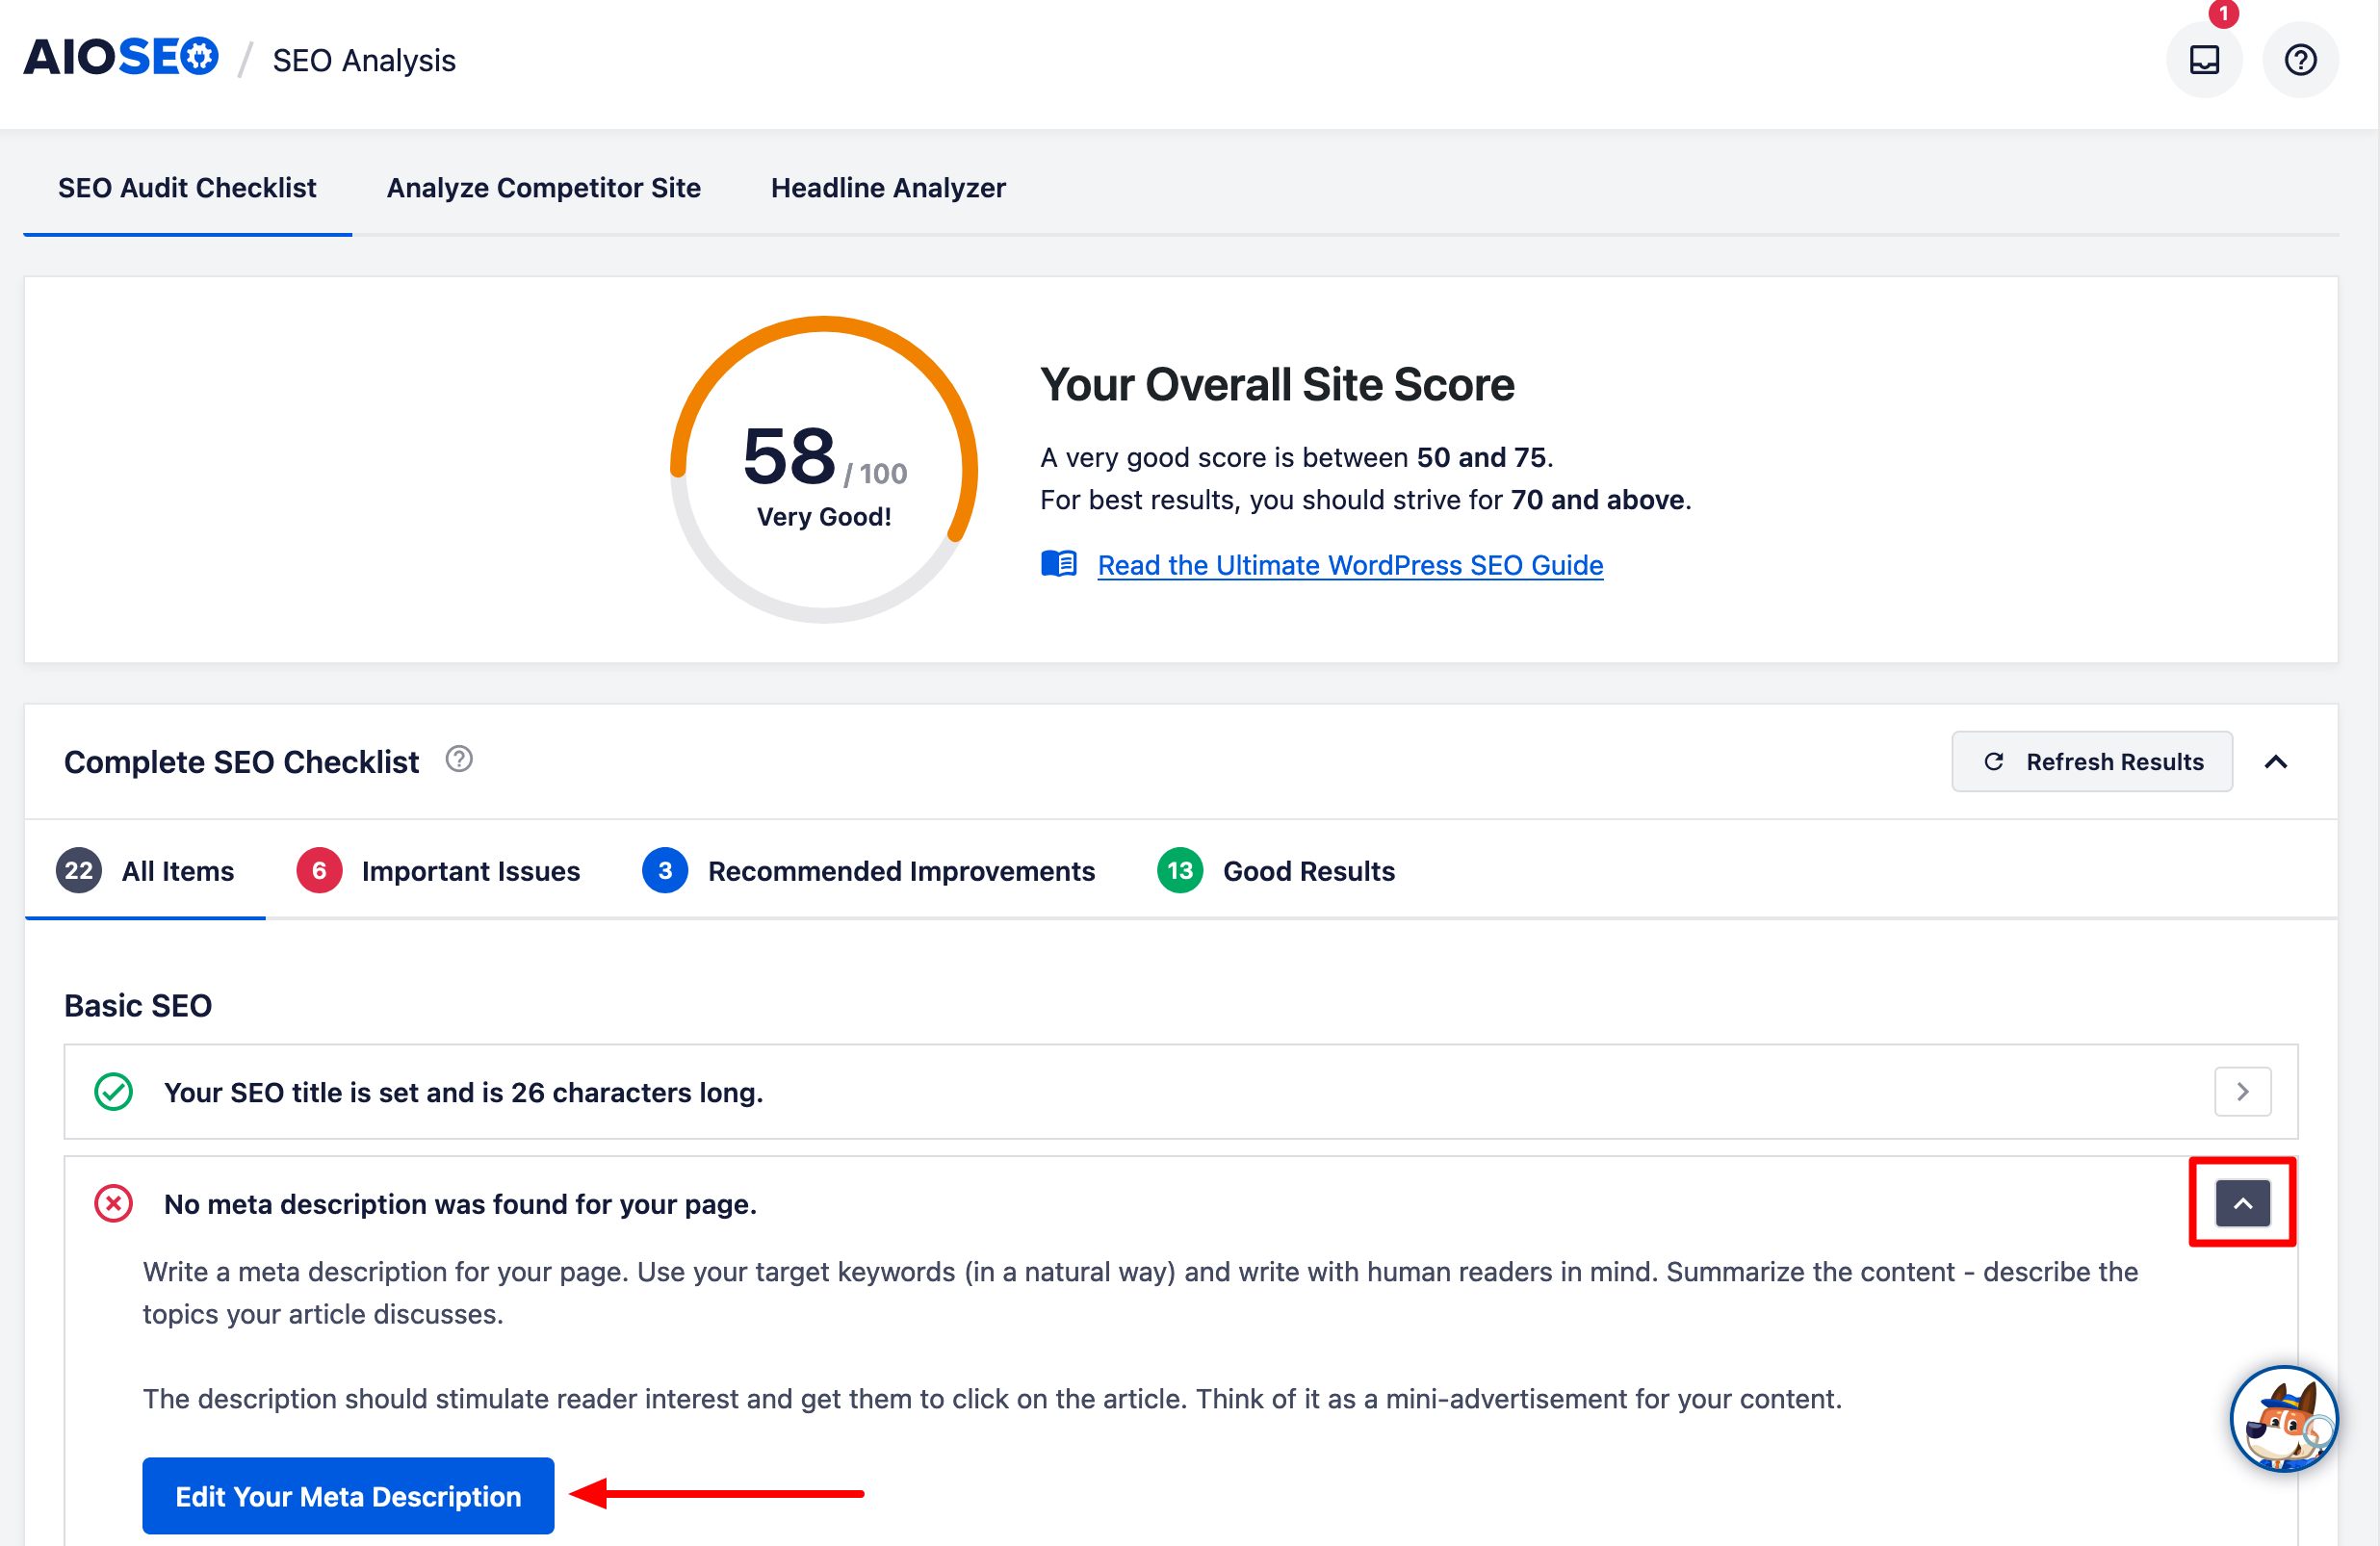 AIOSEO offers an overall site score with suggestions for improvement.